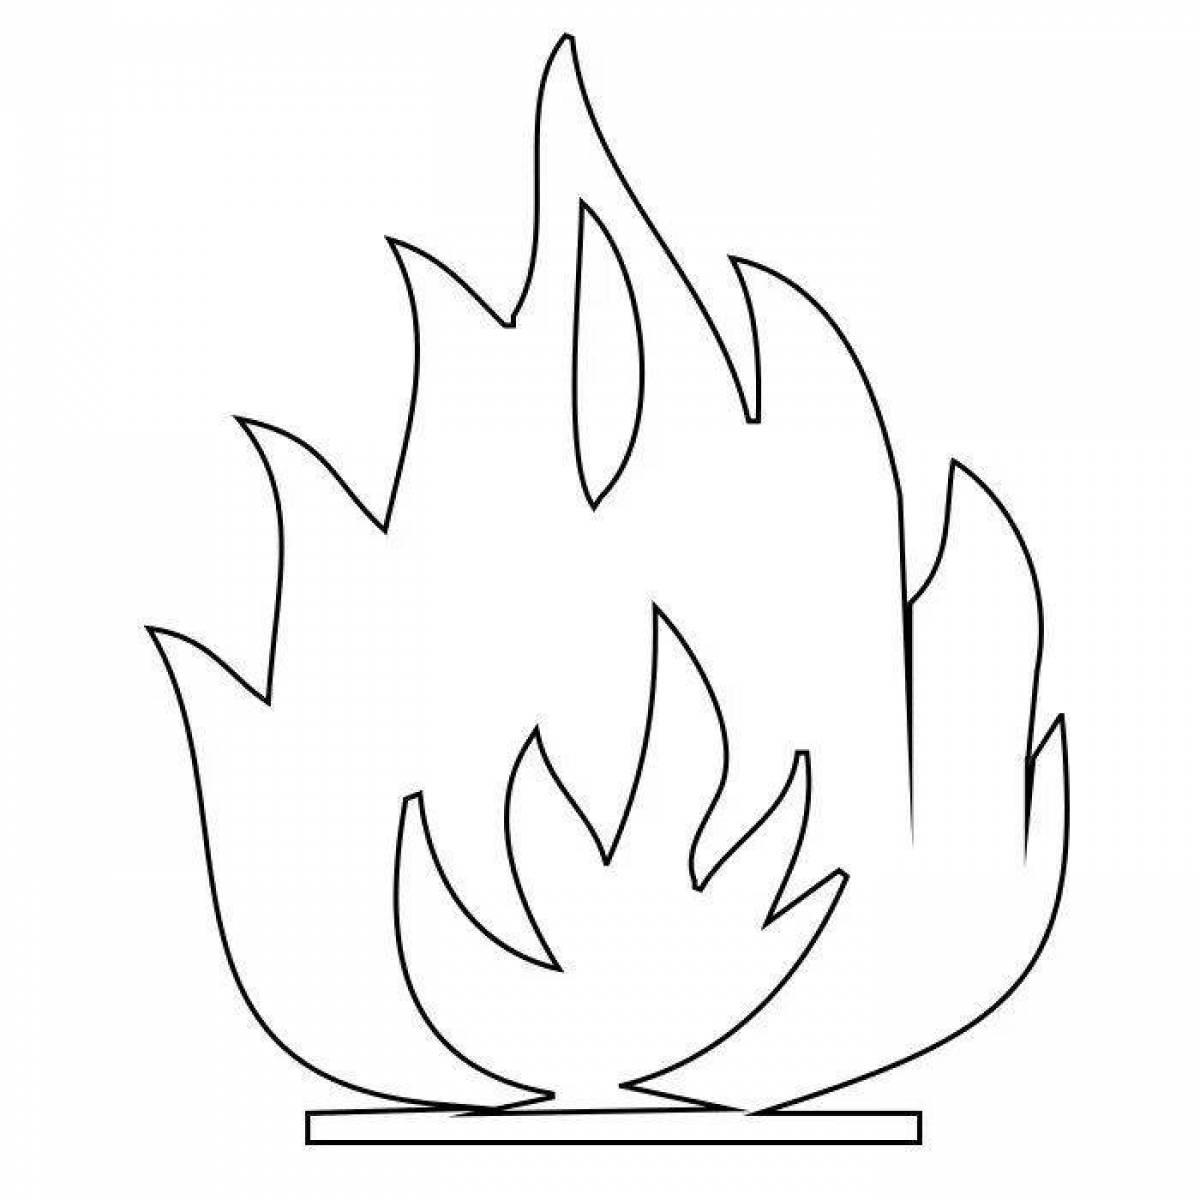 Shining flame coloring book